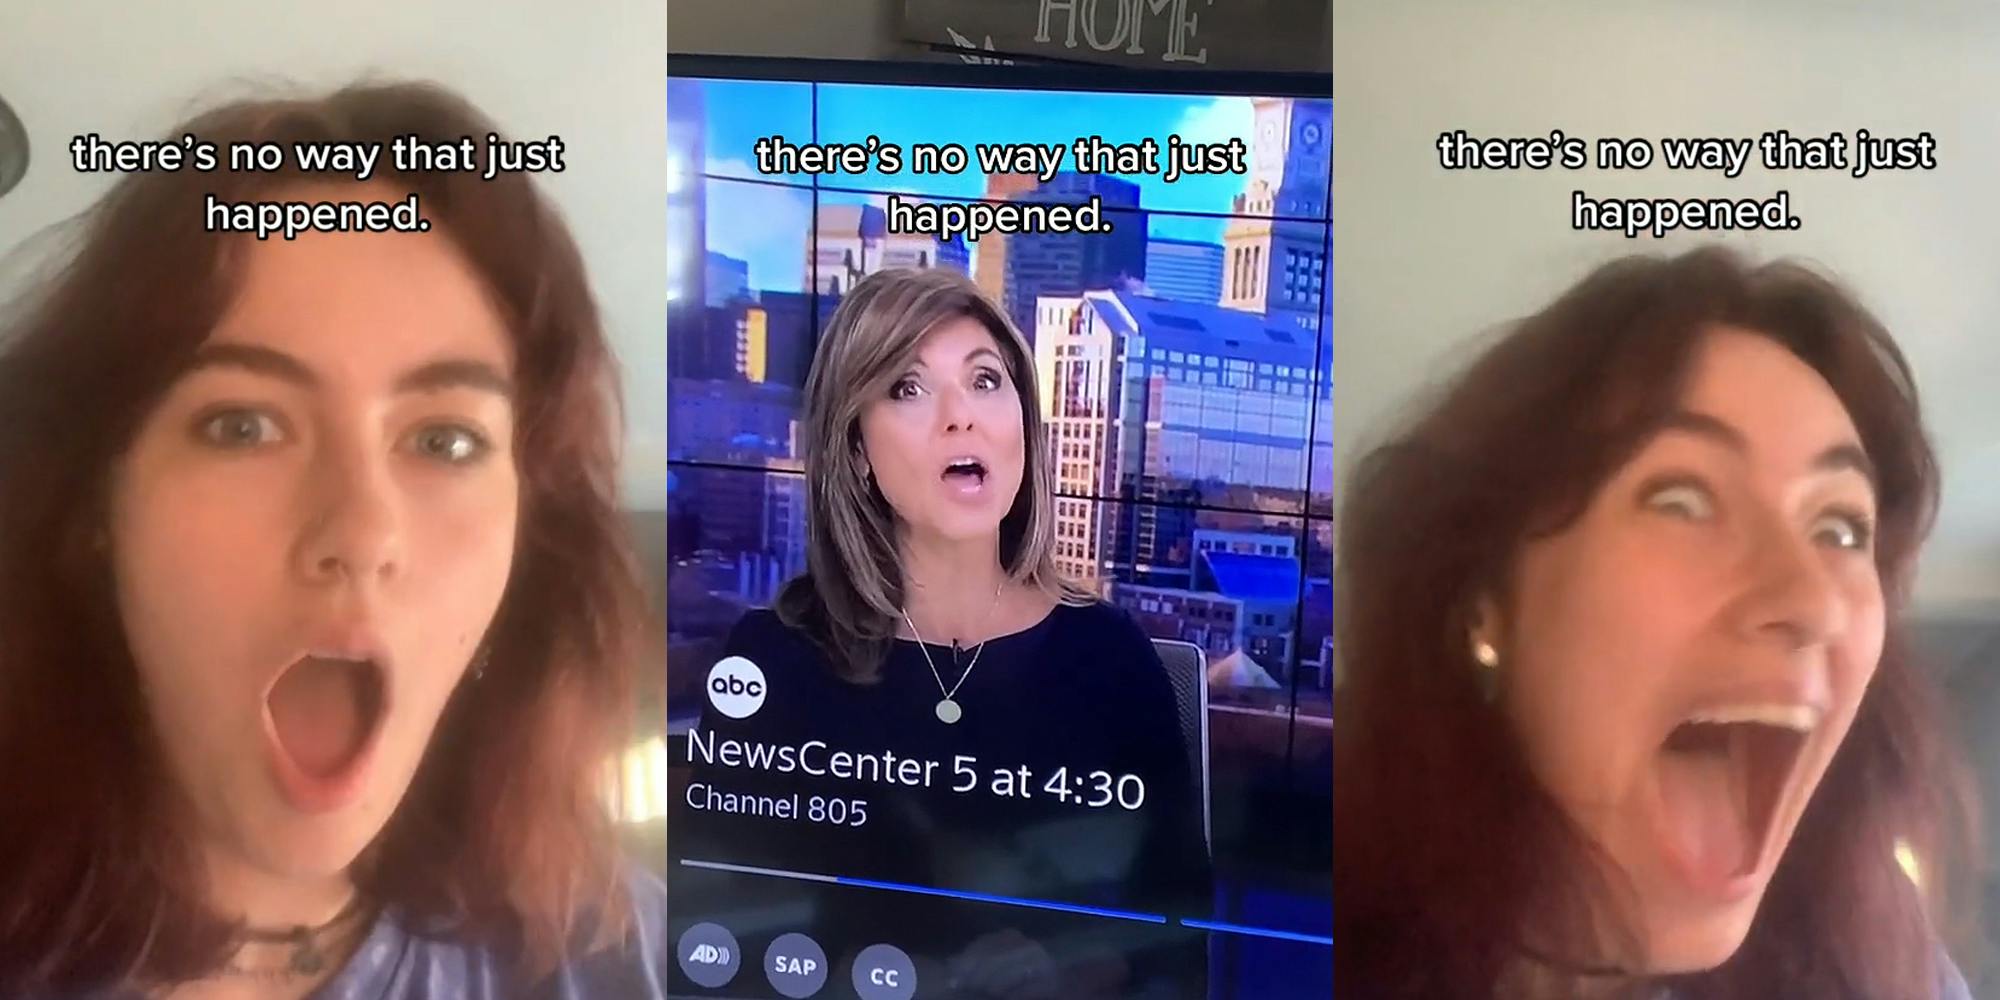 woman mouth open shocked expression caption "there's no way that just happened." (l) ABC NewsCenter 5 news anchor speaking caption "there's no way that just happened." (c) woman mouth open shocked expression caption "there's no way that just happened." (r)